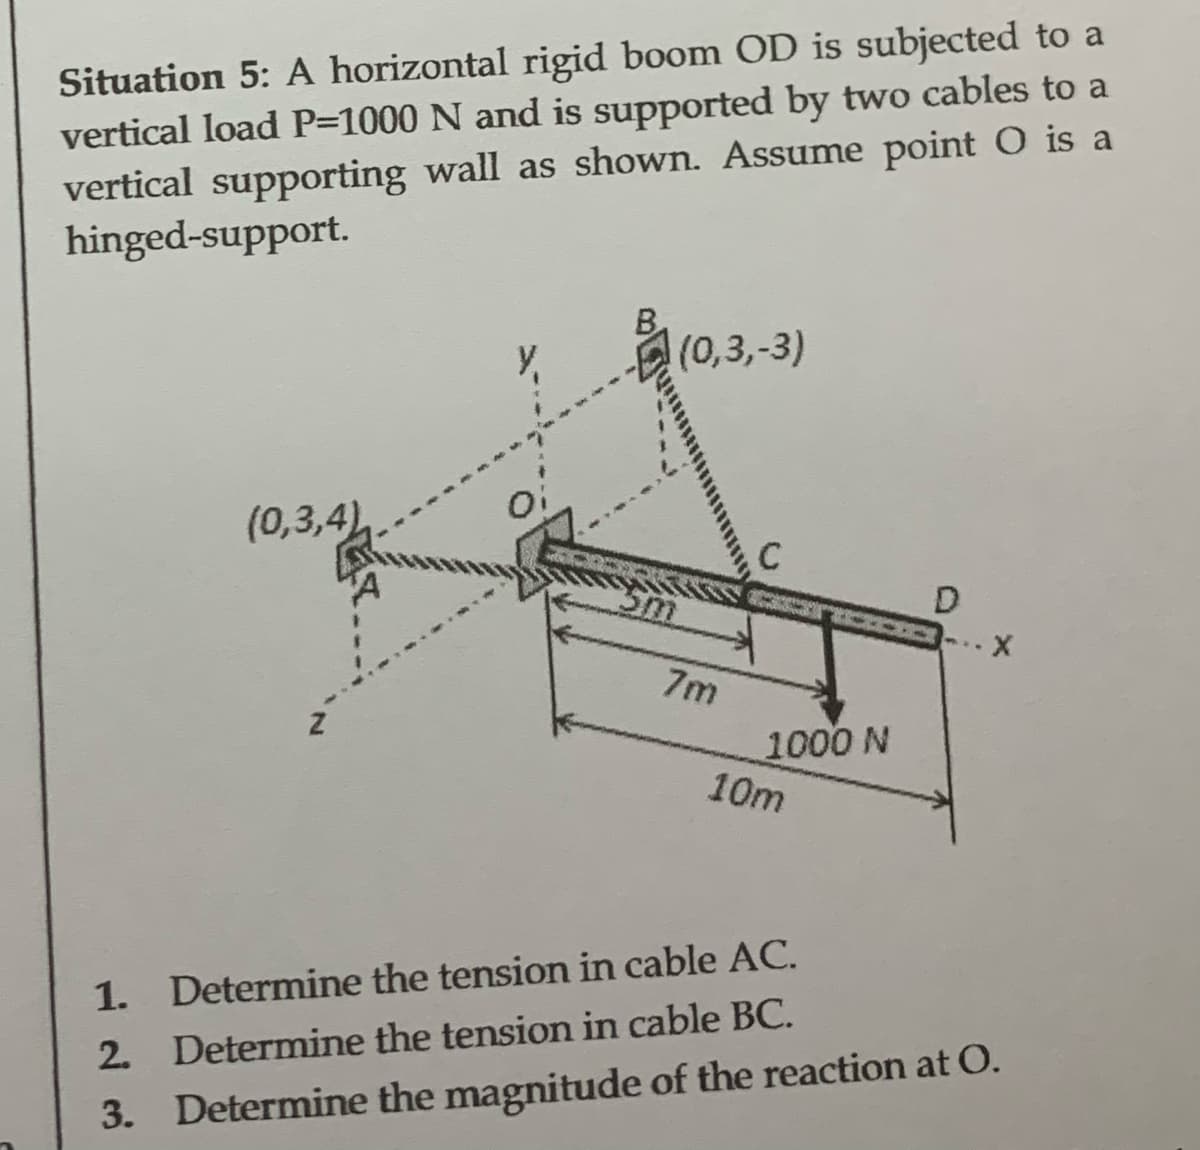 Situation 5: A horizontal rigid boom OD is subjected to a
vertical load P=1000 N and is supported by two cables to a
vertical supporting wall as shown. Assume point O is a
hinged-support.
(0,3,4)
(0,3,-3)
7m
C
1000 N
10m
D
1.
Determine the tension in cable AC.
2. Determine the tension in cable BC.
3. Determine the magnitude of the reaction at O.